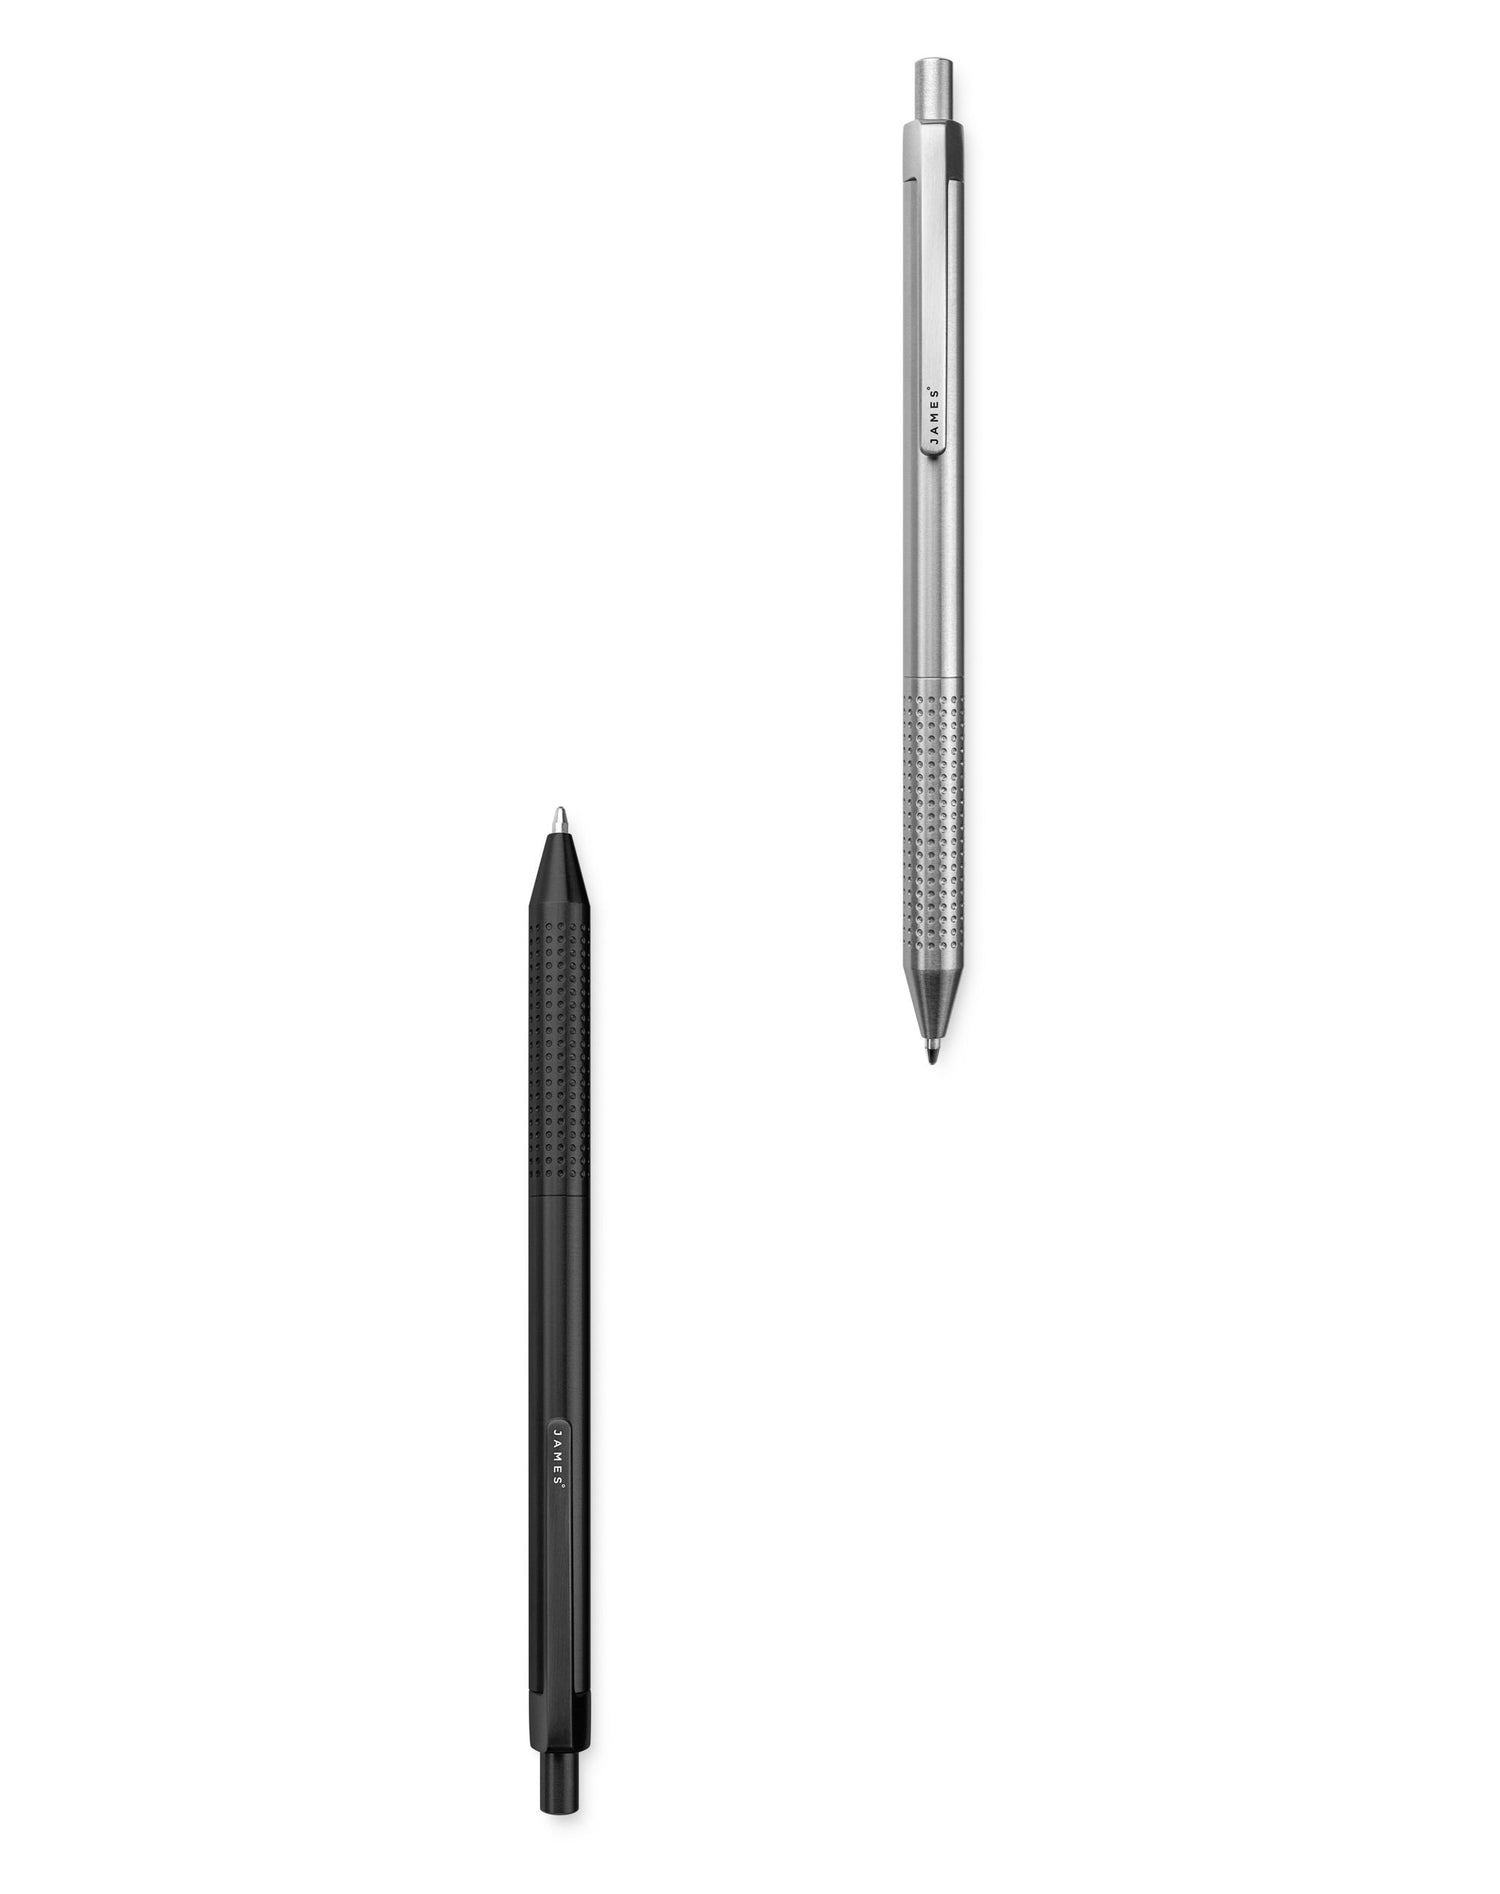 Stilwell pen full length exterior image in stainless and black colors.